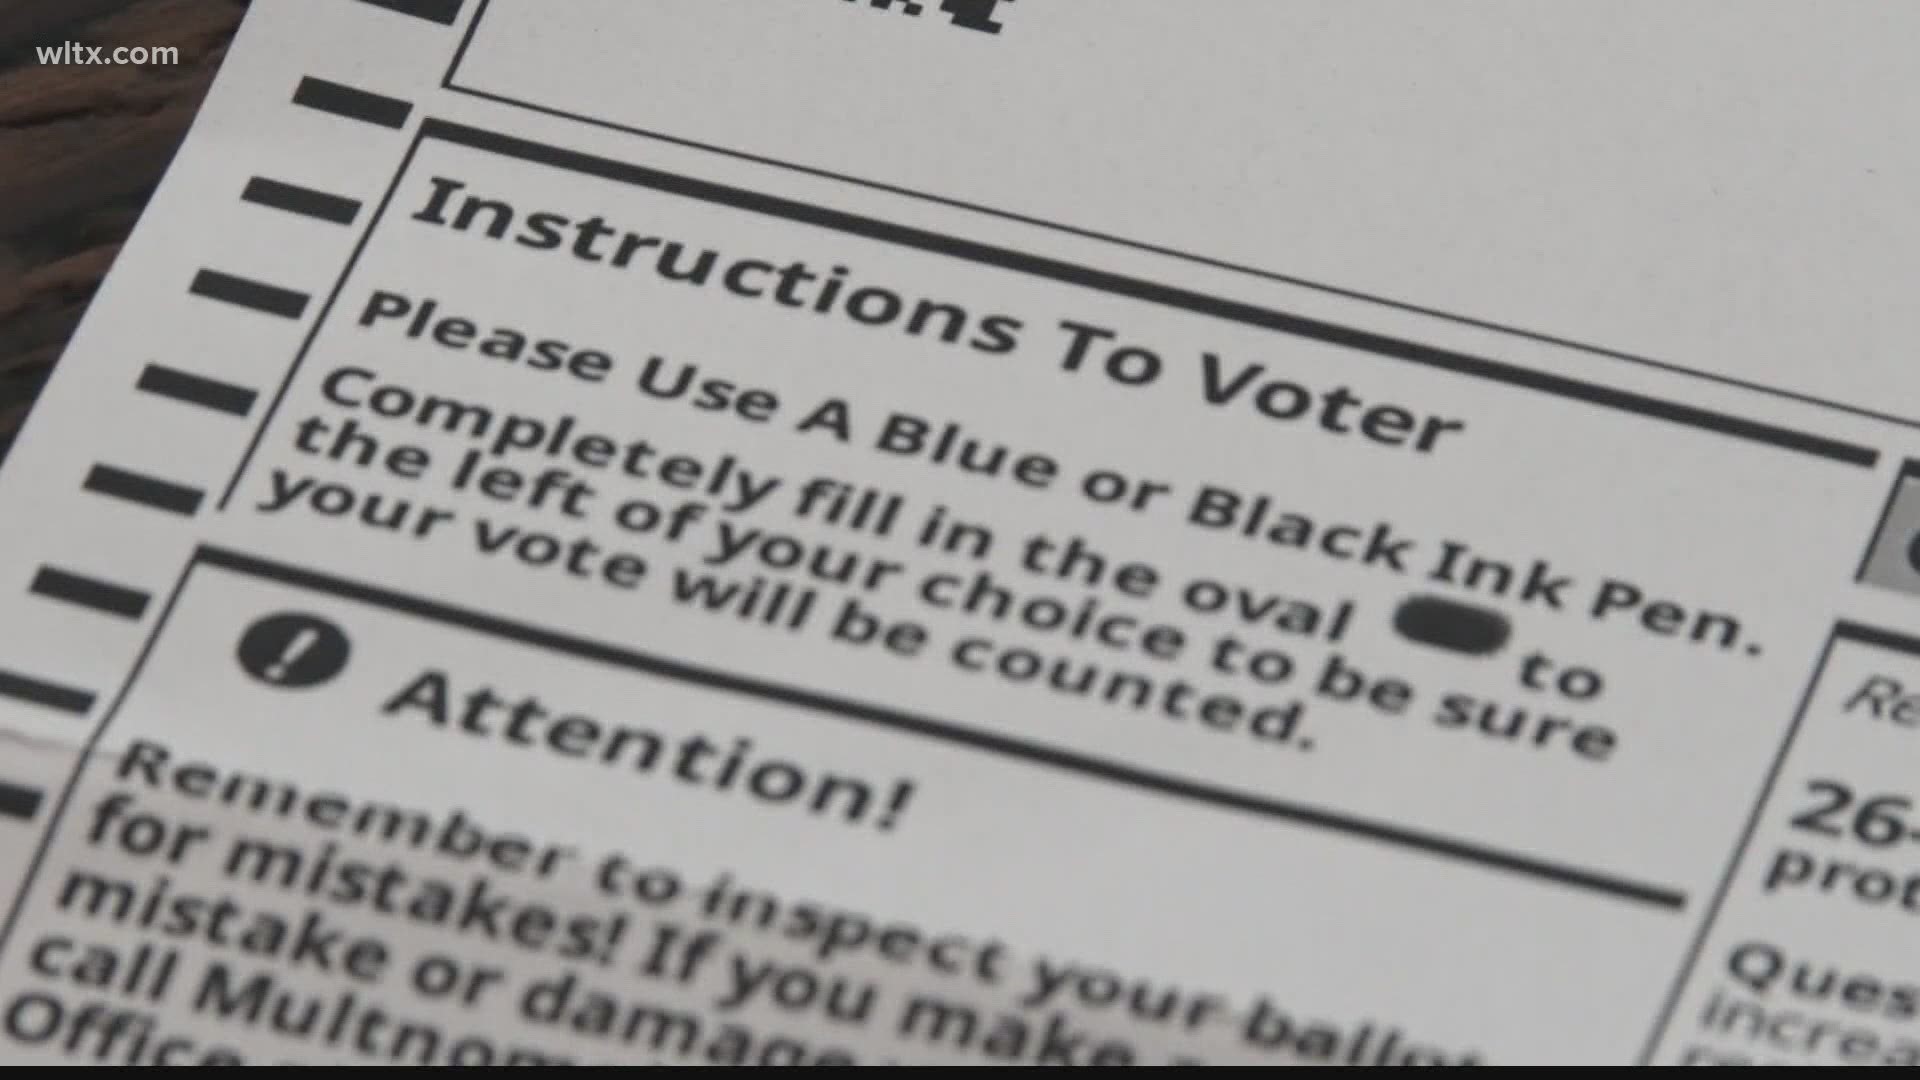 With the rules changing over and over again, the South Carolina Election Commission recommends submitting ballots with a witness signature to be extra safe.